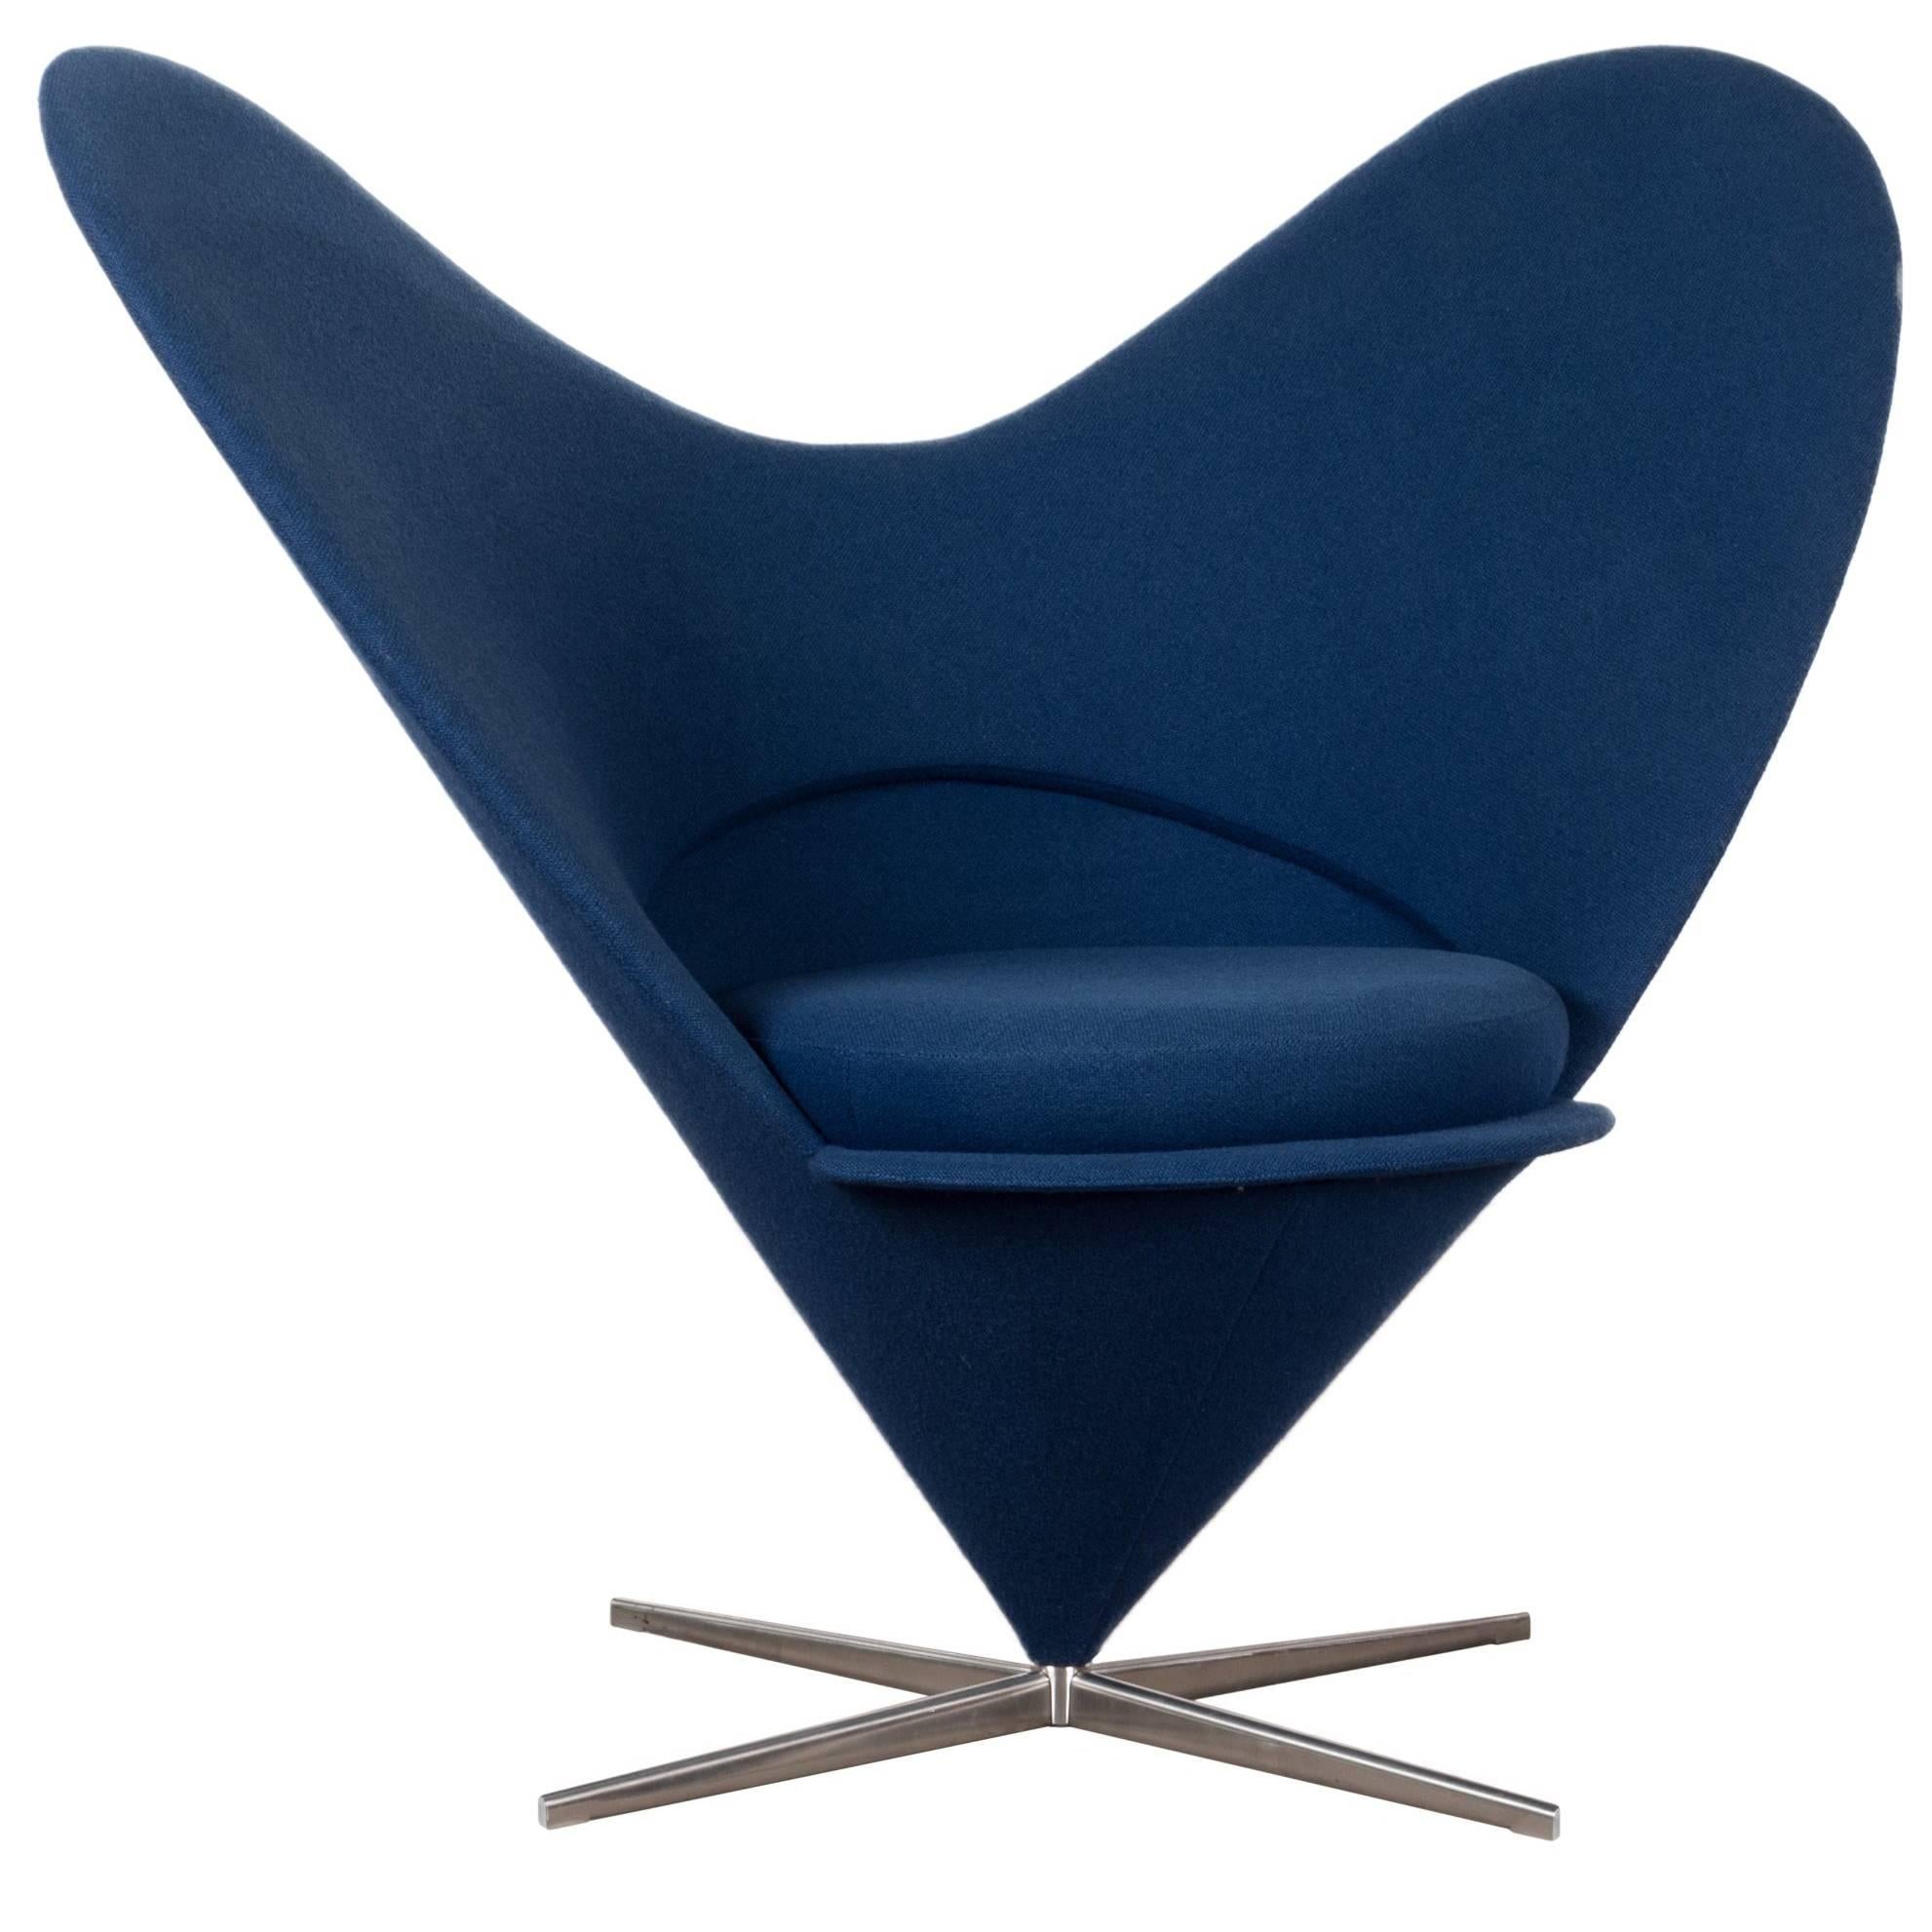 Verner Panton Cone Heart Chair by Vitra, Germany